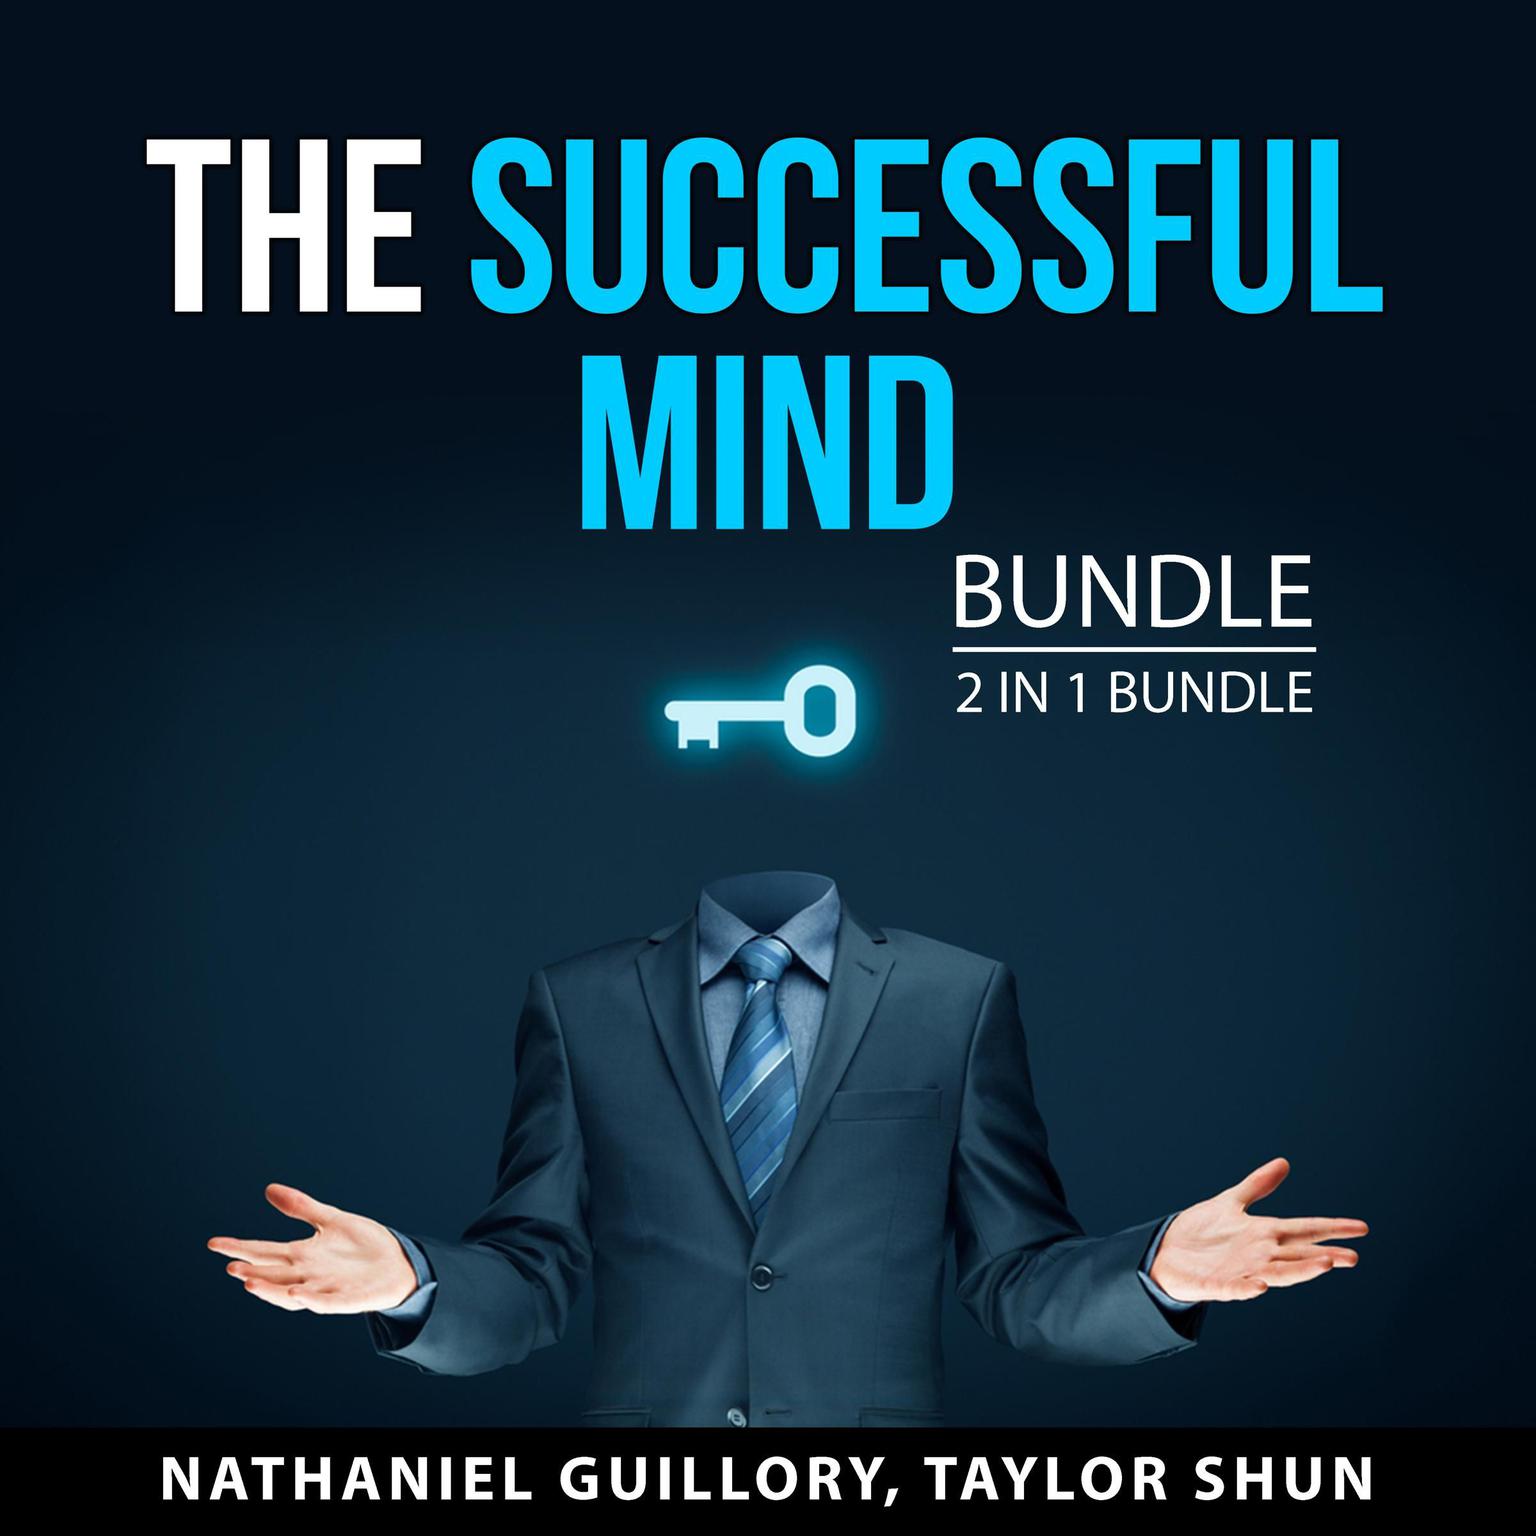 The Successful Mind Bundle, 2 in 1 Bundle Audiobook, by Nathaniel Guillory